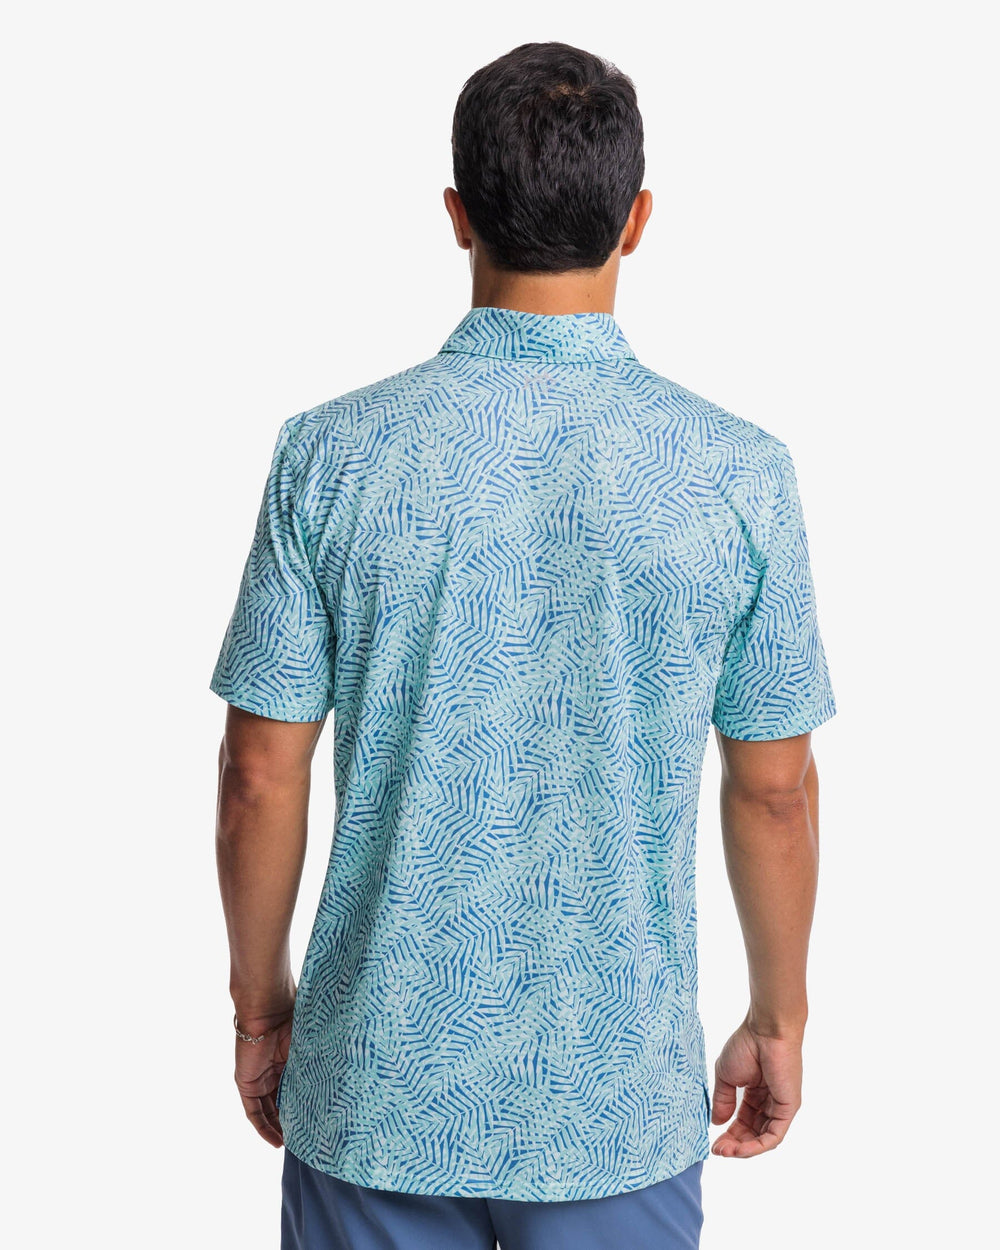 The back view of the Southern Tide Driver Vibin Palm Print Performance Polo Shirt by Southern Tide - Atlantic Blue